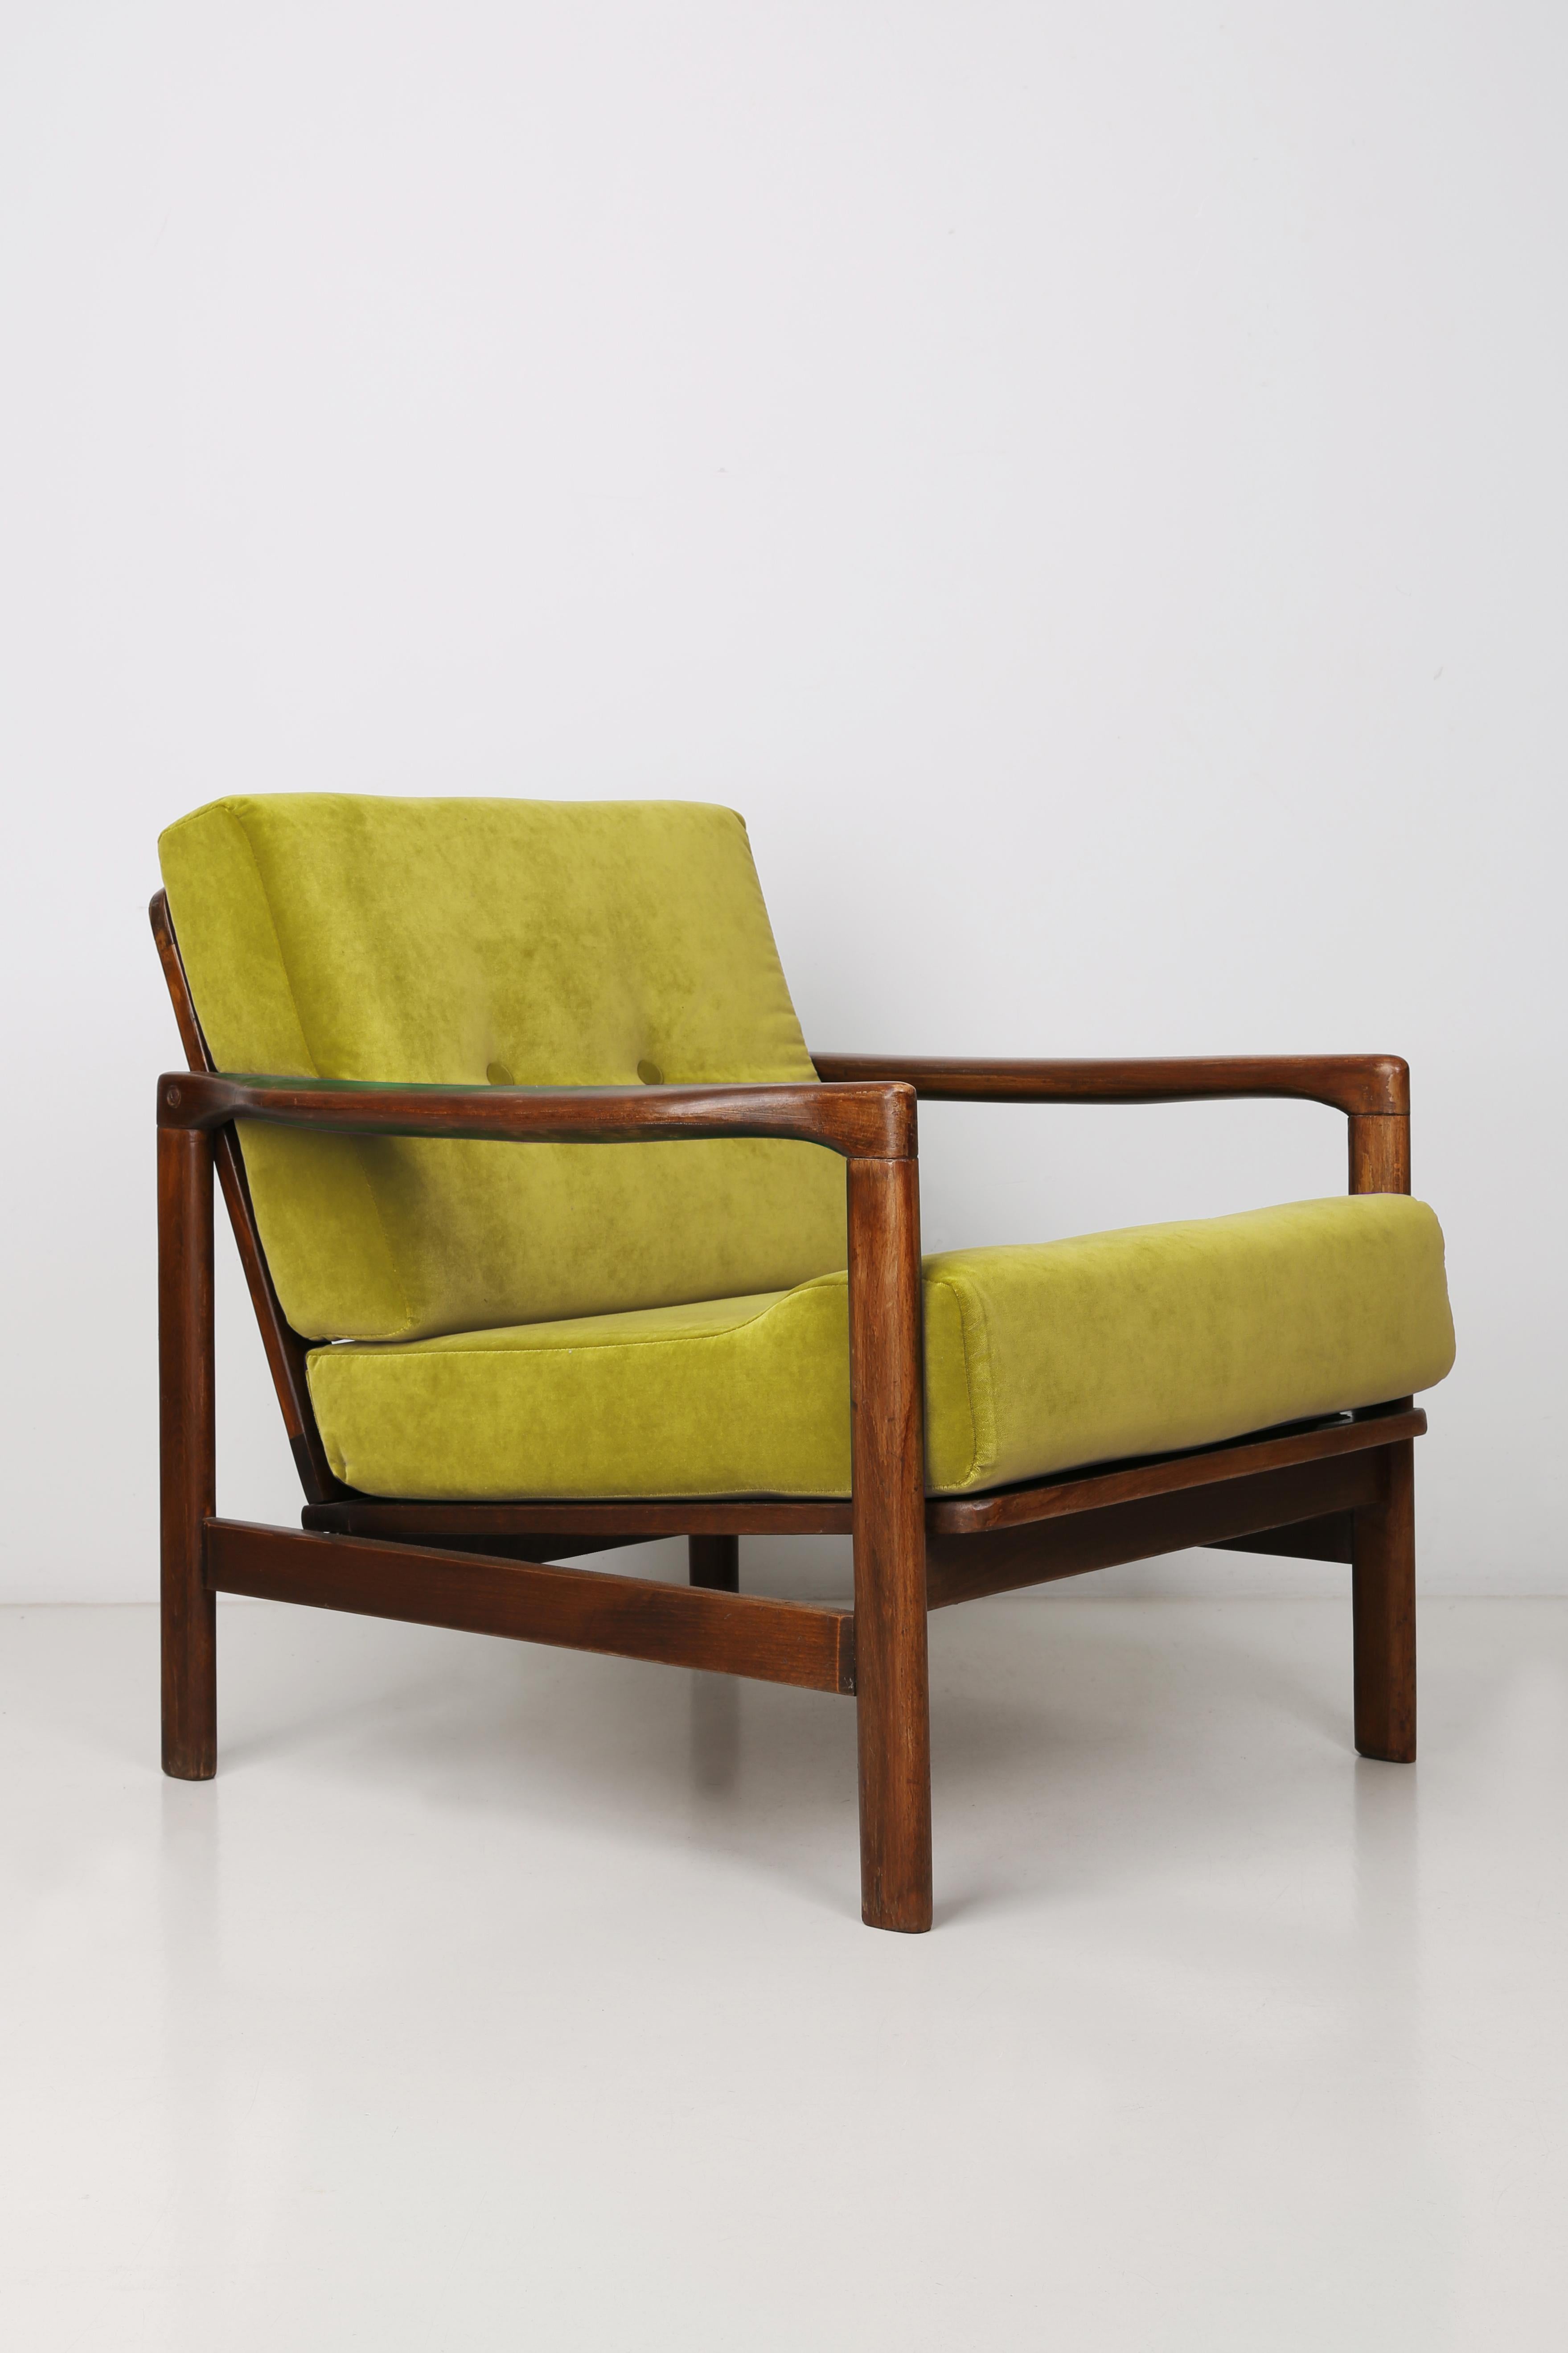 The B-7522 armchairs was designed in the 1960s by Zenon Baczyk, it was produced by Swarzedz Furniture Factories in Poland. Furniture kept in perfect condition, after full upholstery and wood renovation. Stabile and very comfortable armchair, dressed